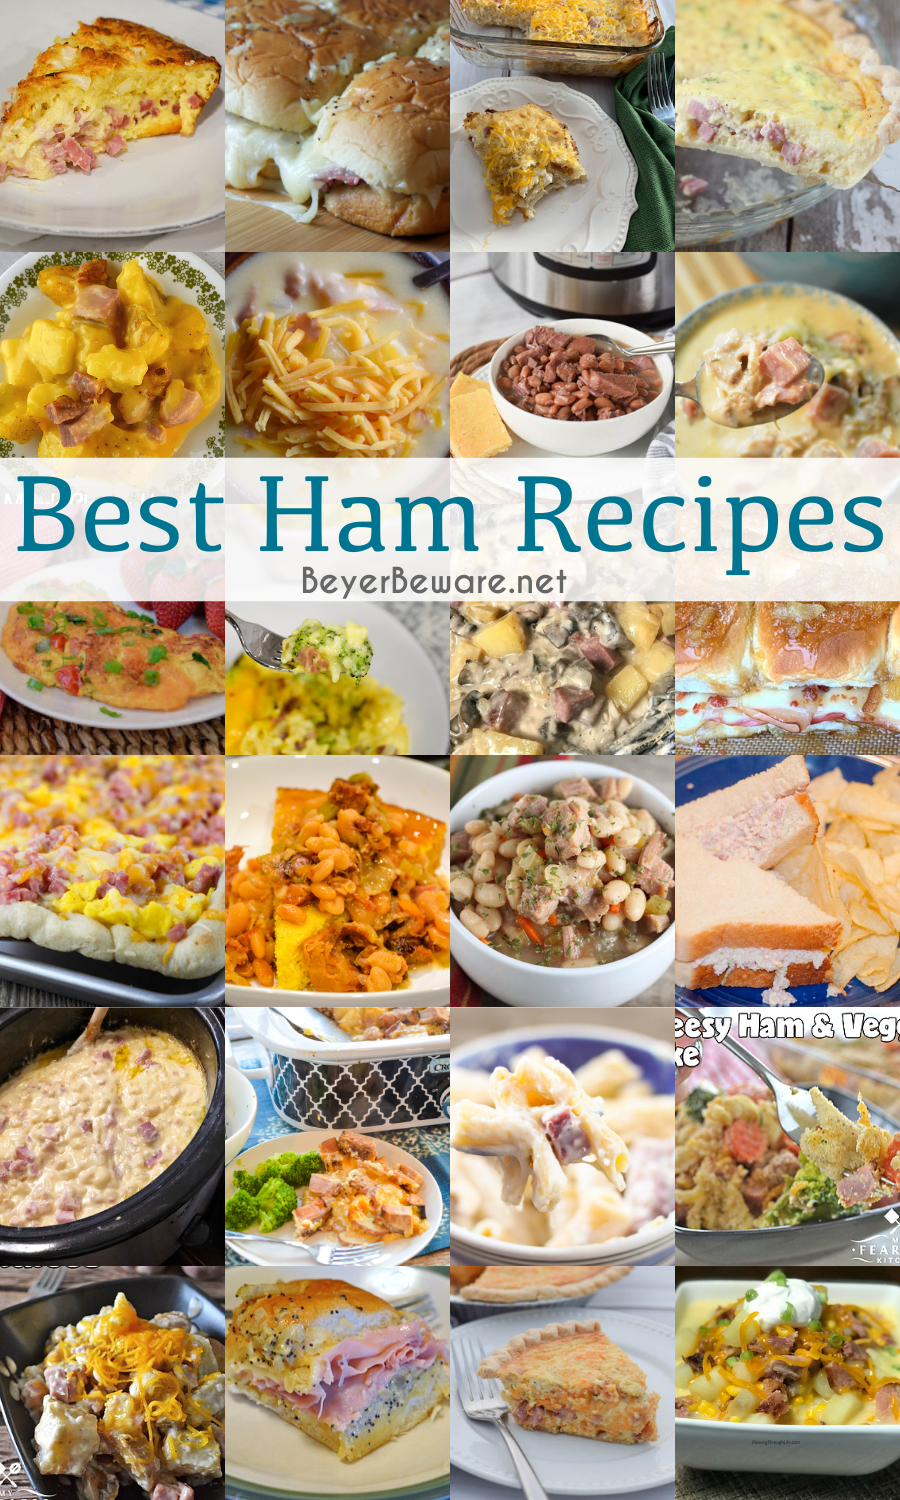 These ham recipes are a great way to use leftovers. Don't overlook ham as a great star of recipes at any time of the year as well. Buying cubed ham is a great way to make a quick weeknight meal.